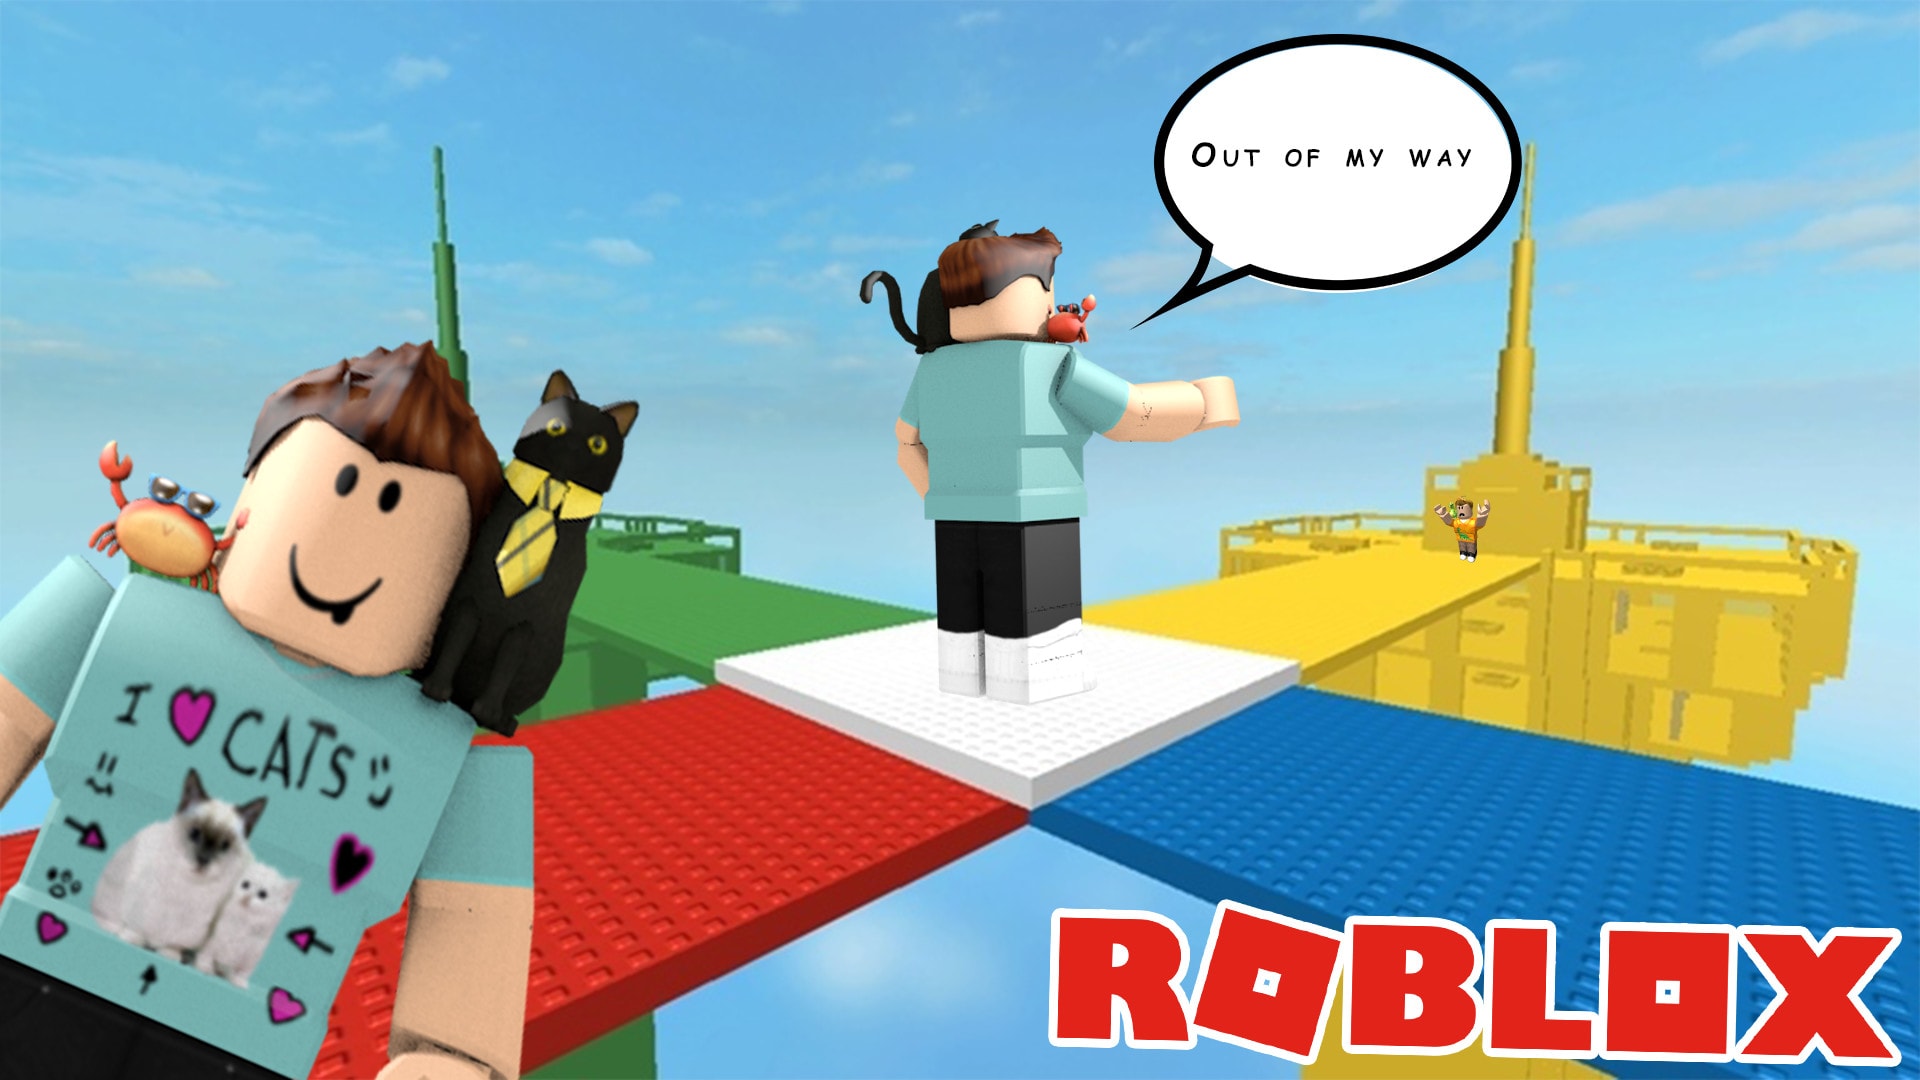 Roblox Advanced Avatar Editor Mobile Simply Render And Edit Touch Up Your Roblox Avatar By Eb R519